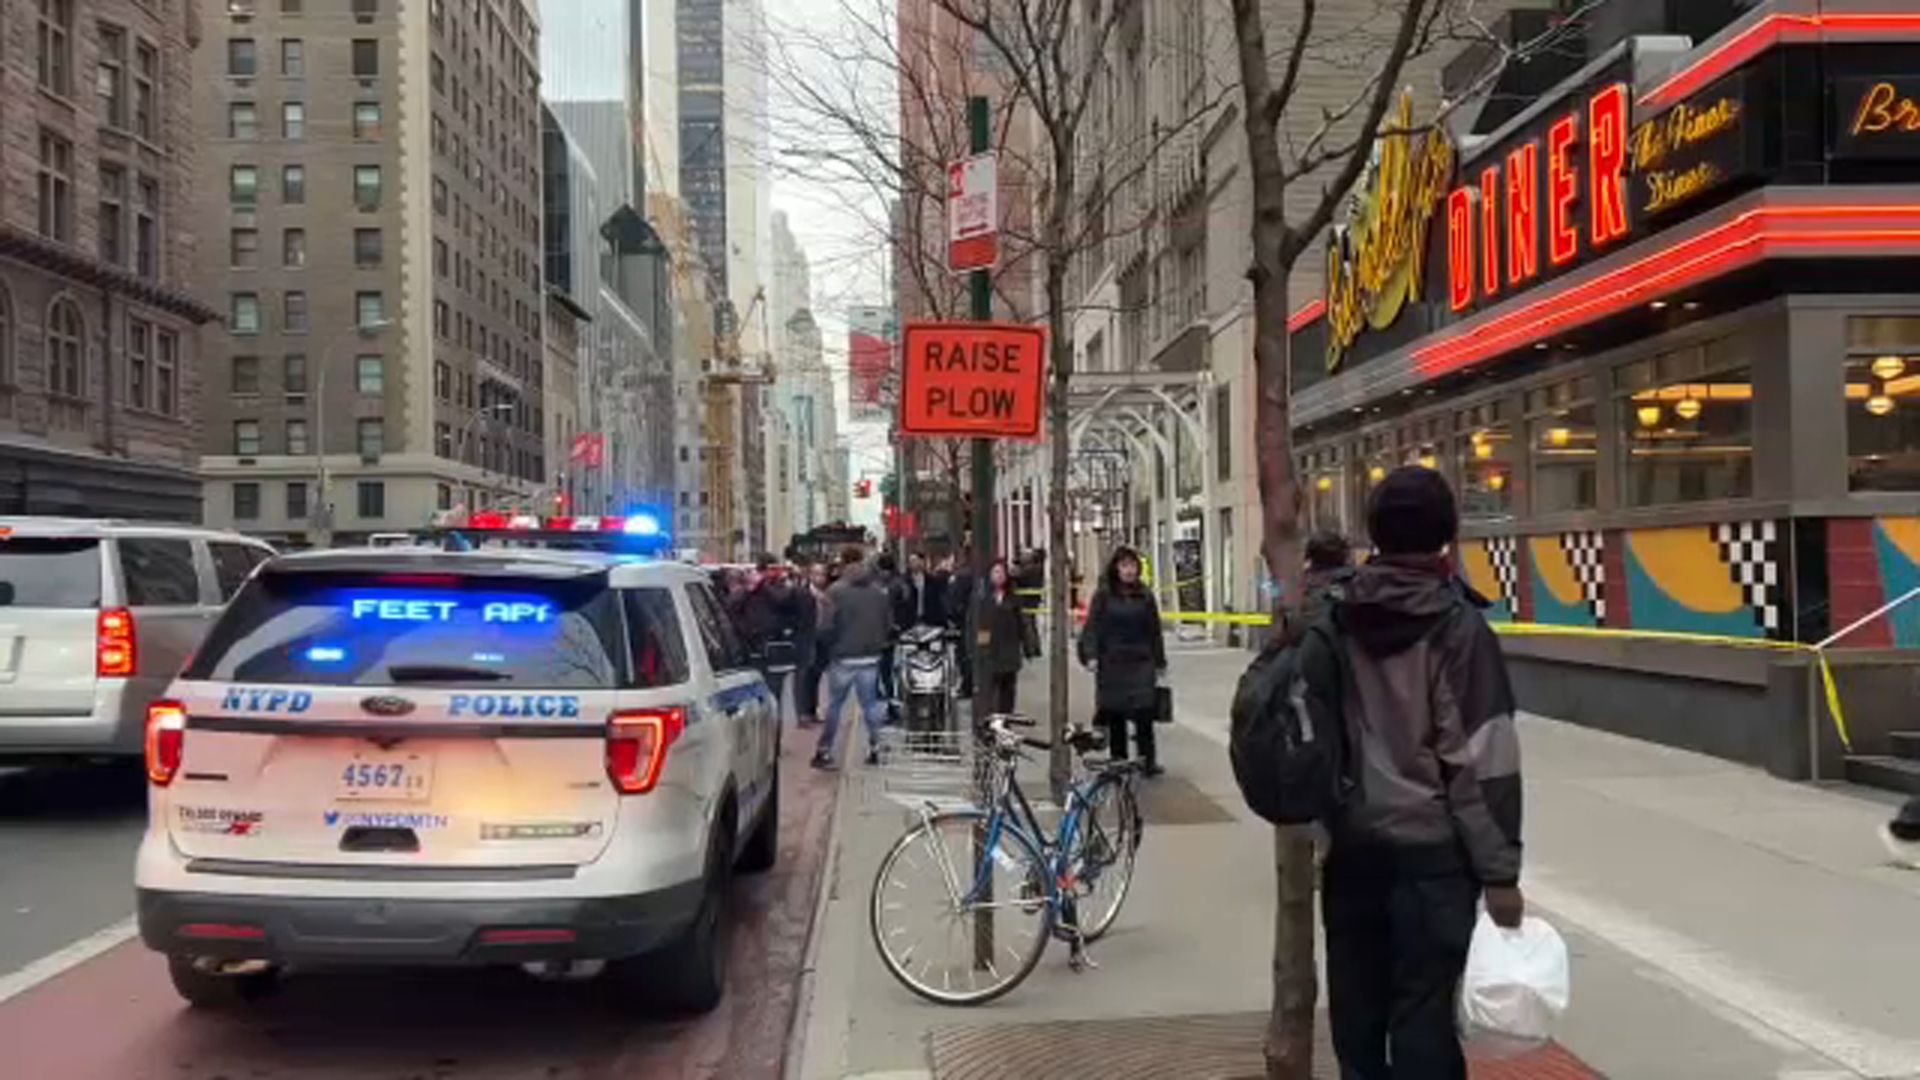 61-year-old woman stabbed twice in shoulder by unknown man in Midtown, Manhattan